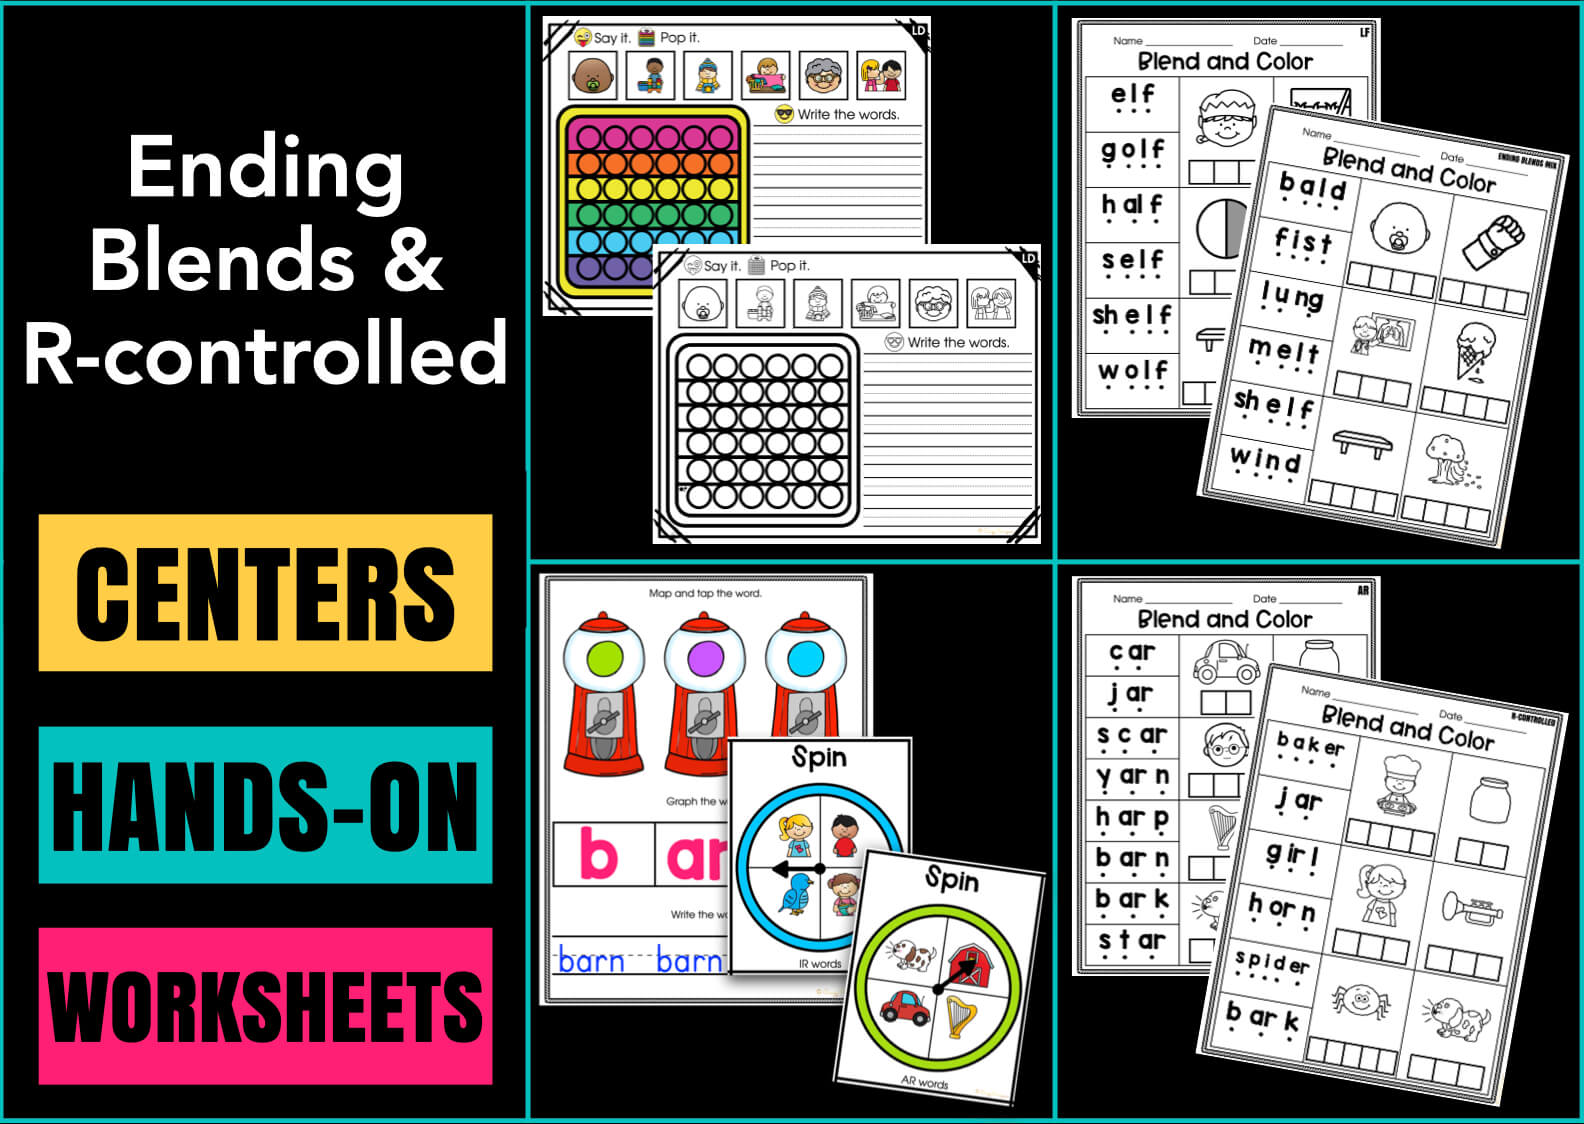 ENDING BLENDS AND R-CONTROLLED activities